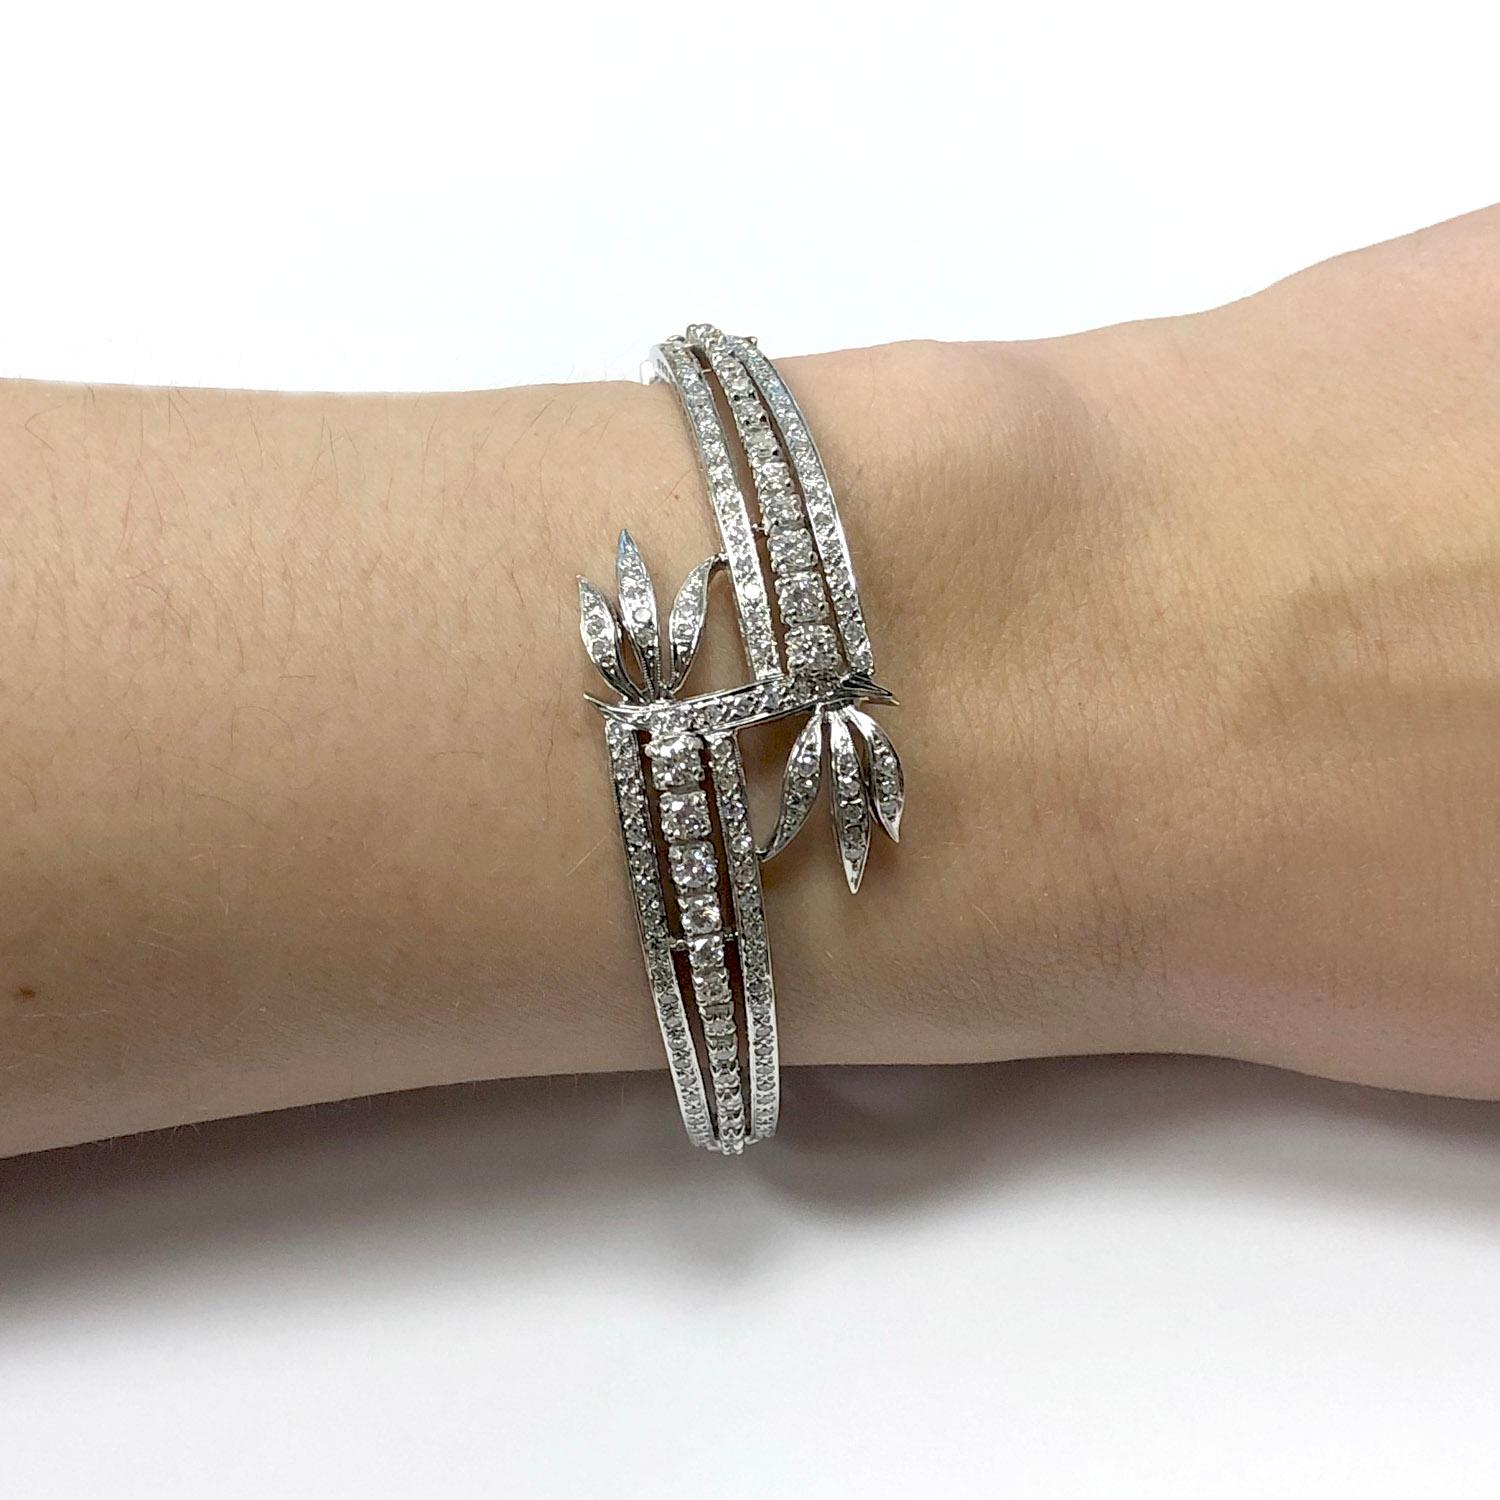 14Kt White Gold Rigid Bypass Lady's Bracelet with estimated 1.83ct of diamonds with push clasp and a safety eight clasp.

- 10 graduated round brilliant cut diamonds = approx. 0.56 Ct total weight
- 17 graduated single cut diamonds = approx. 0.18 Ct